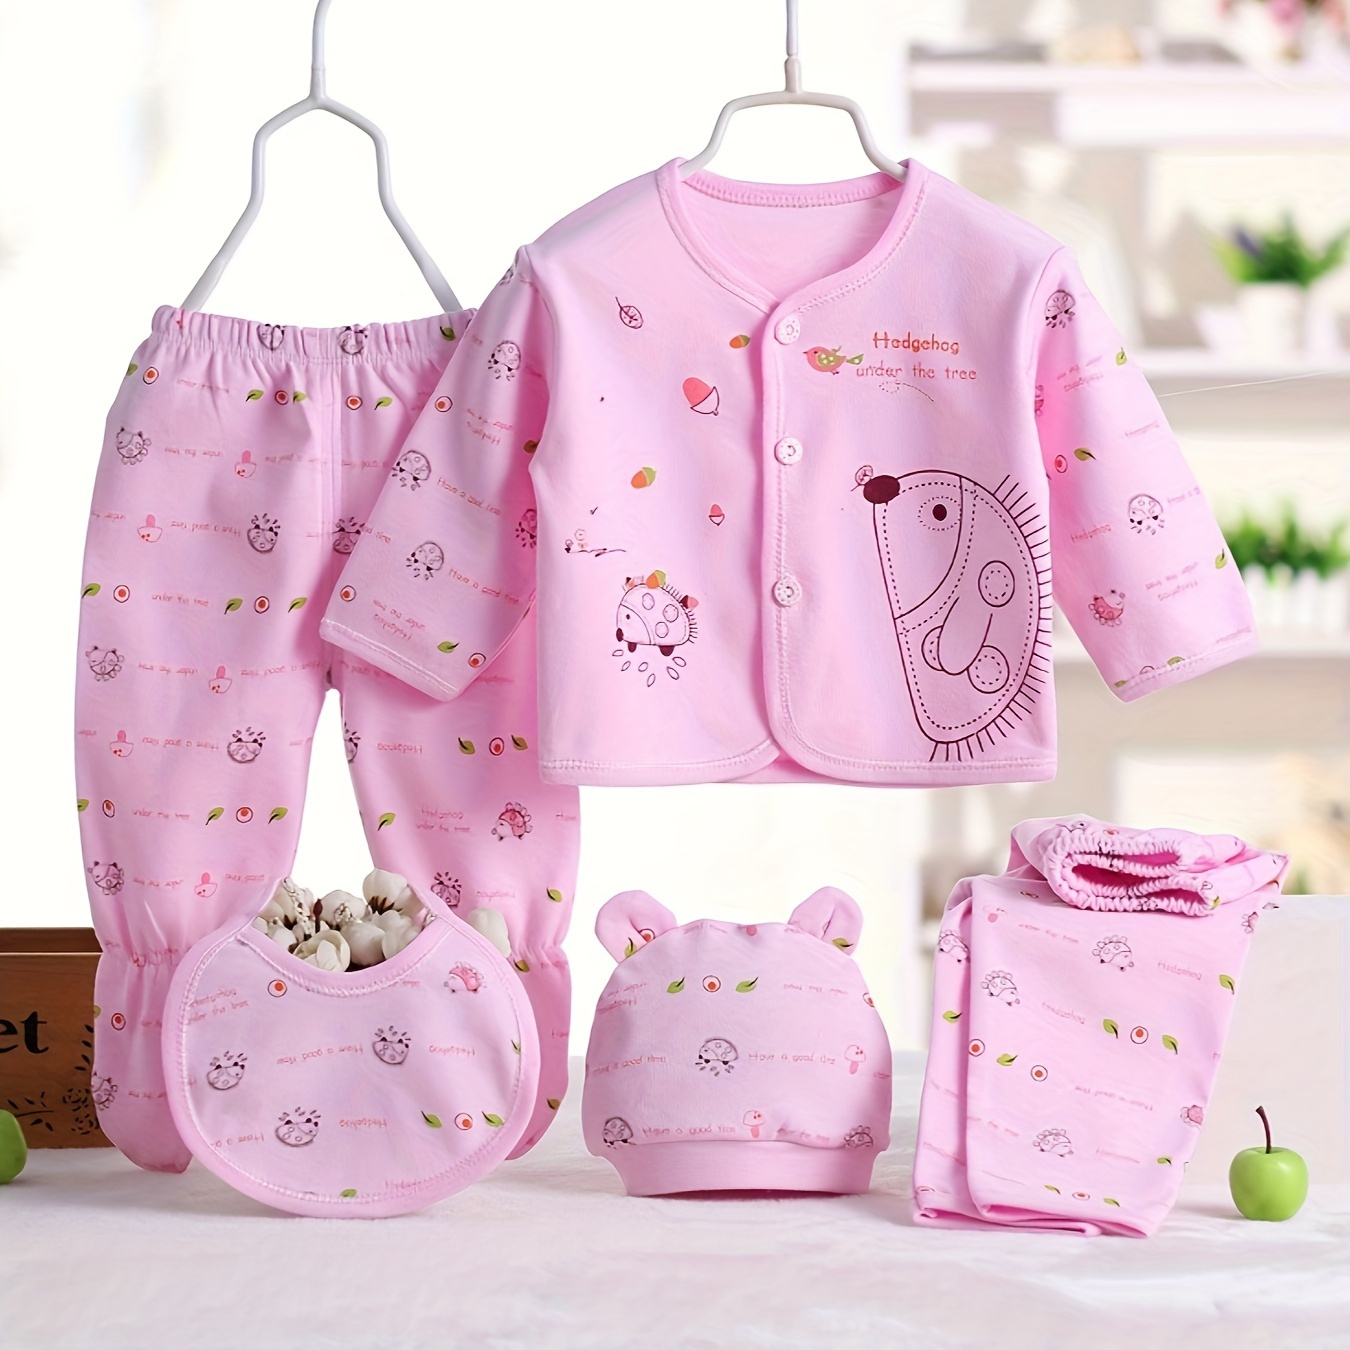 

0-3 Months Newborn Baby Loungewear Set, Comfy Cotton & Cute Graphic 5pcs Outfits Gifts For Going Out Casual Clothes - Bib Footed Pants Trousers Cardigan Top Bear Hat